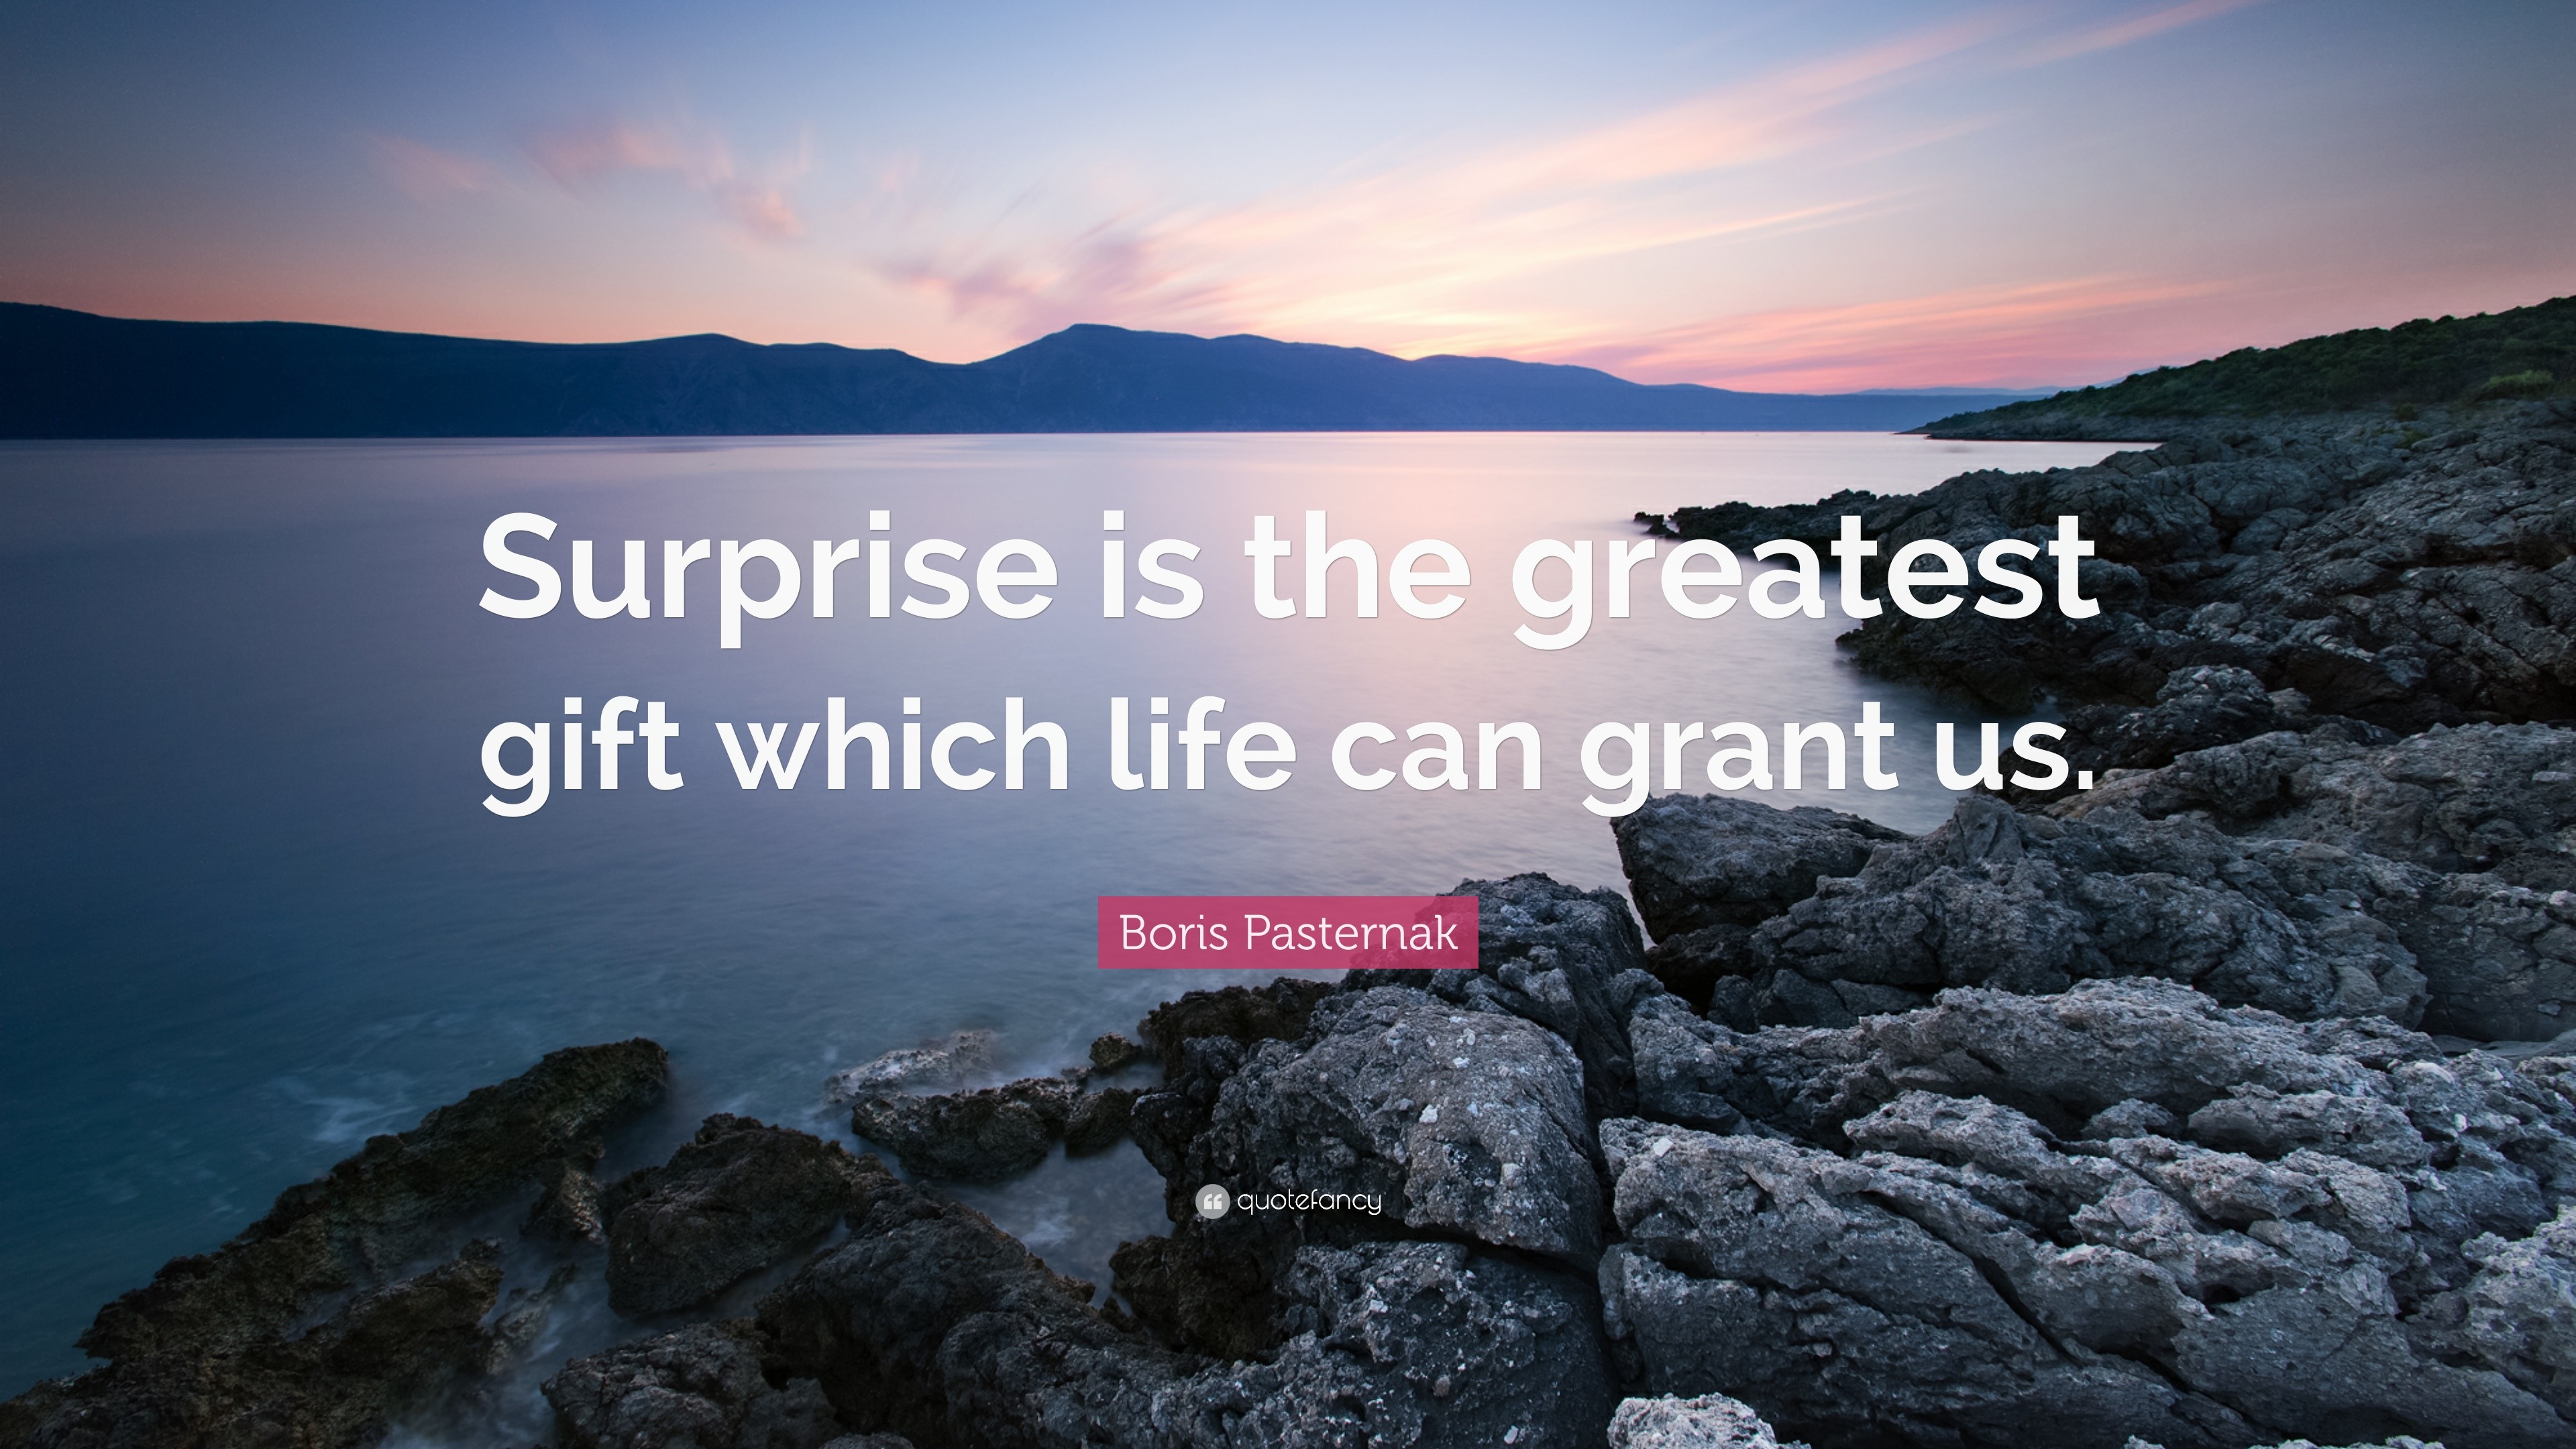 New poem about a surprise gift Quotes, Status, Photo, Video | Nojoto